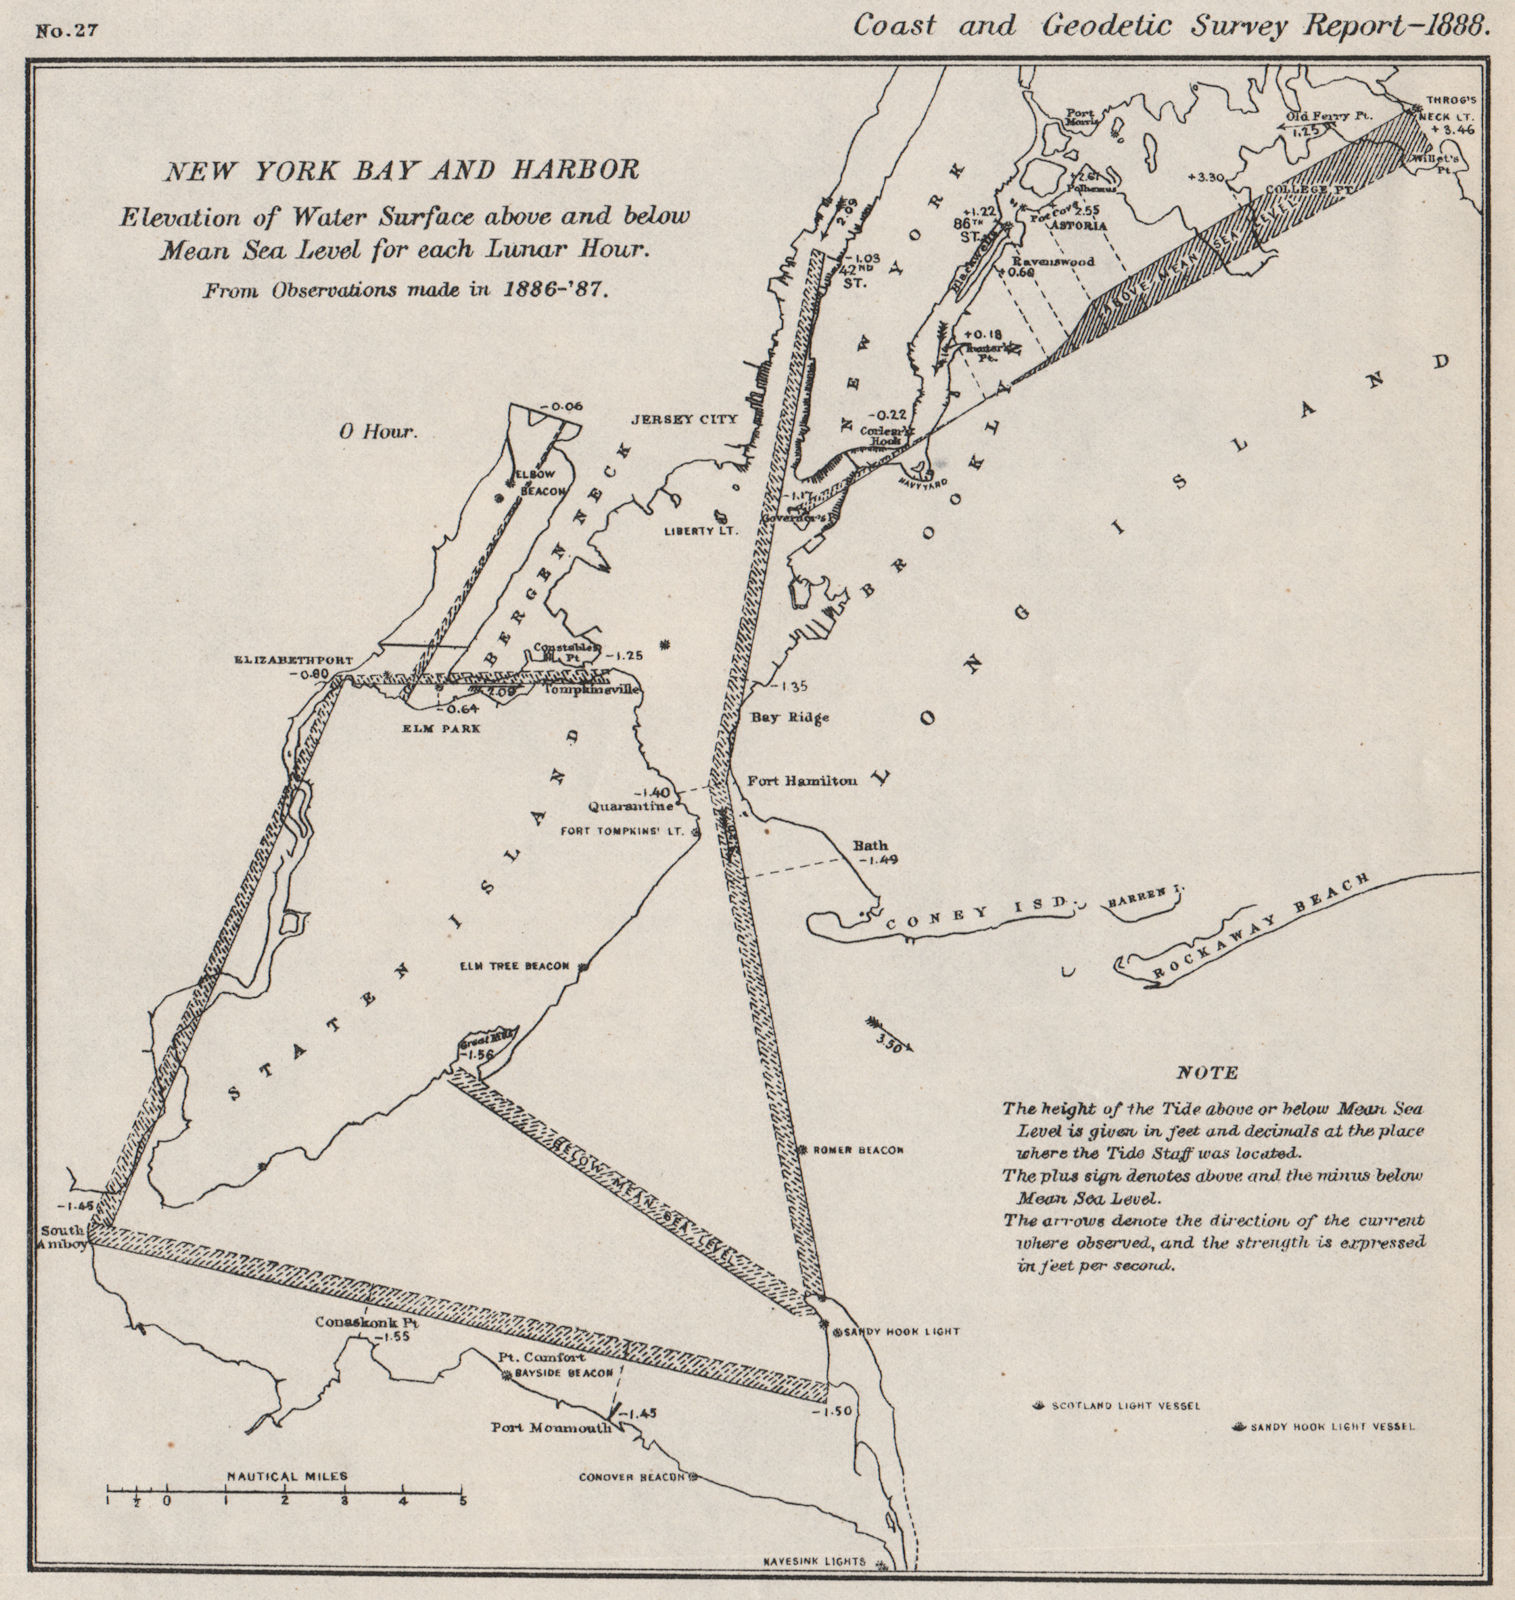 NEW YORK BAY/HARBOR. Water level v mean sea level Lunar Hour 0. USCGS 1889 map